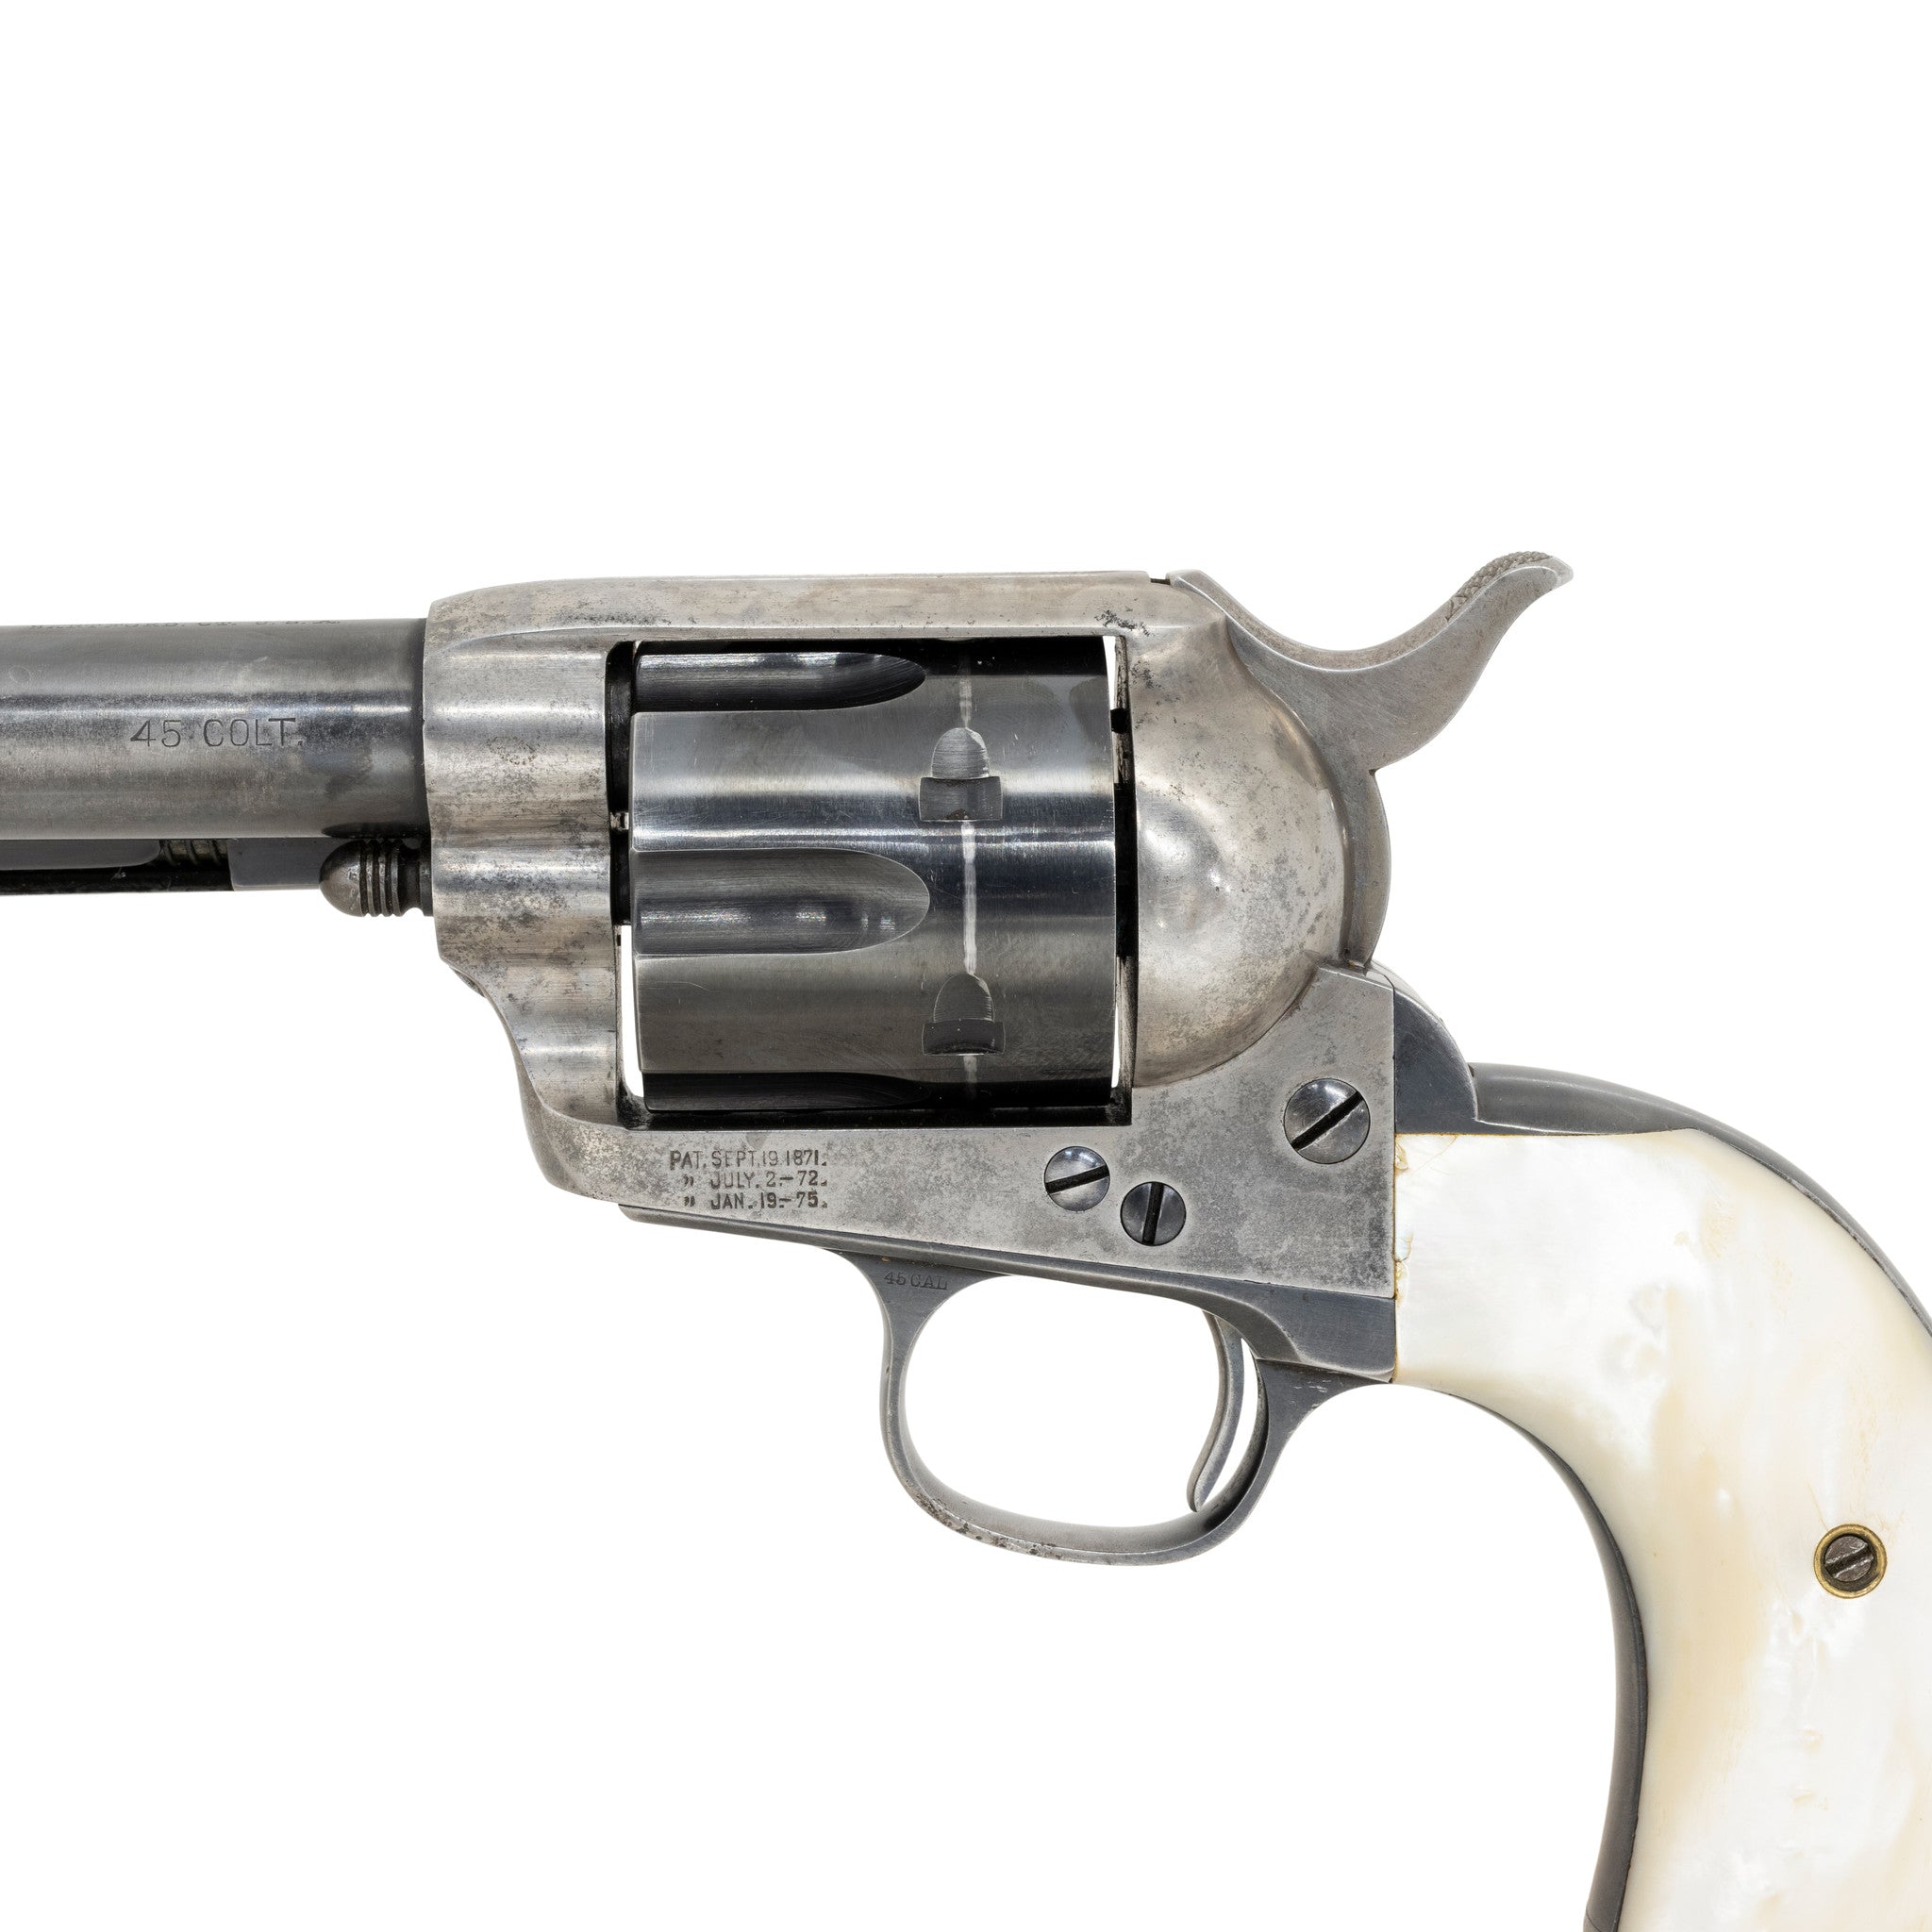 Colt Single Action Army Revolvers